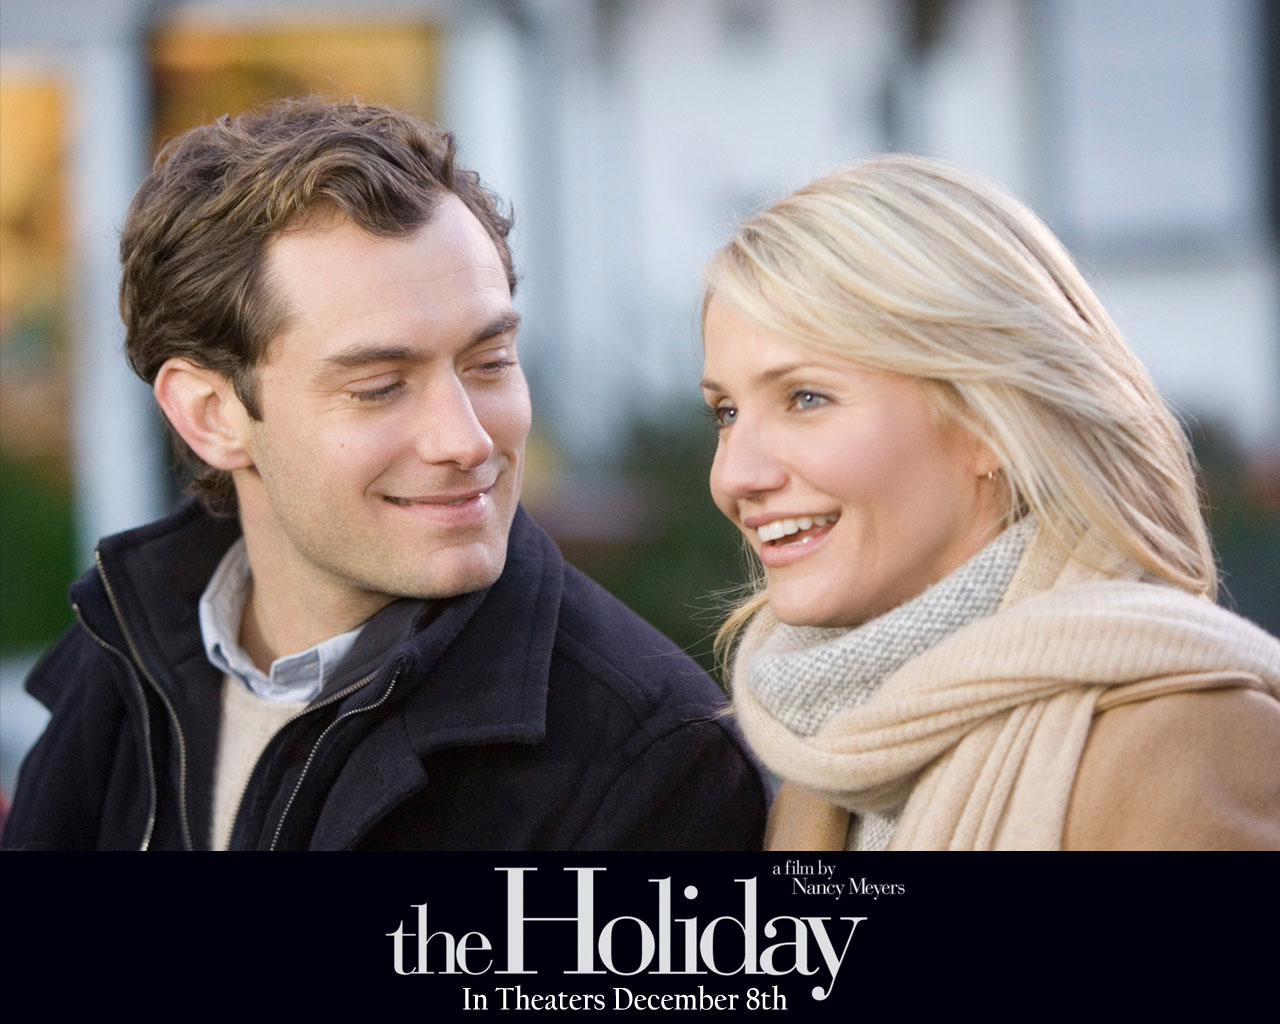 Cameron_Diaz_in_The_Holiday_Wallpaper_1_1280